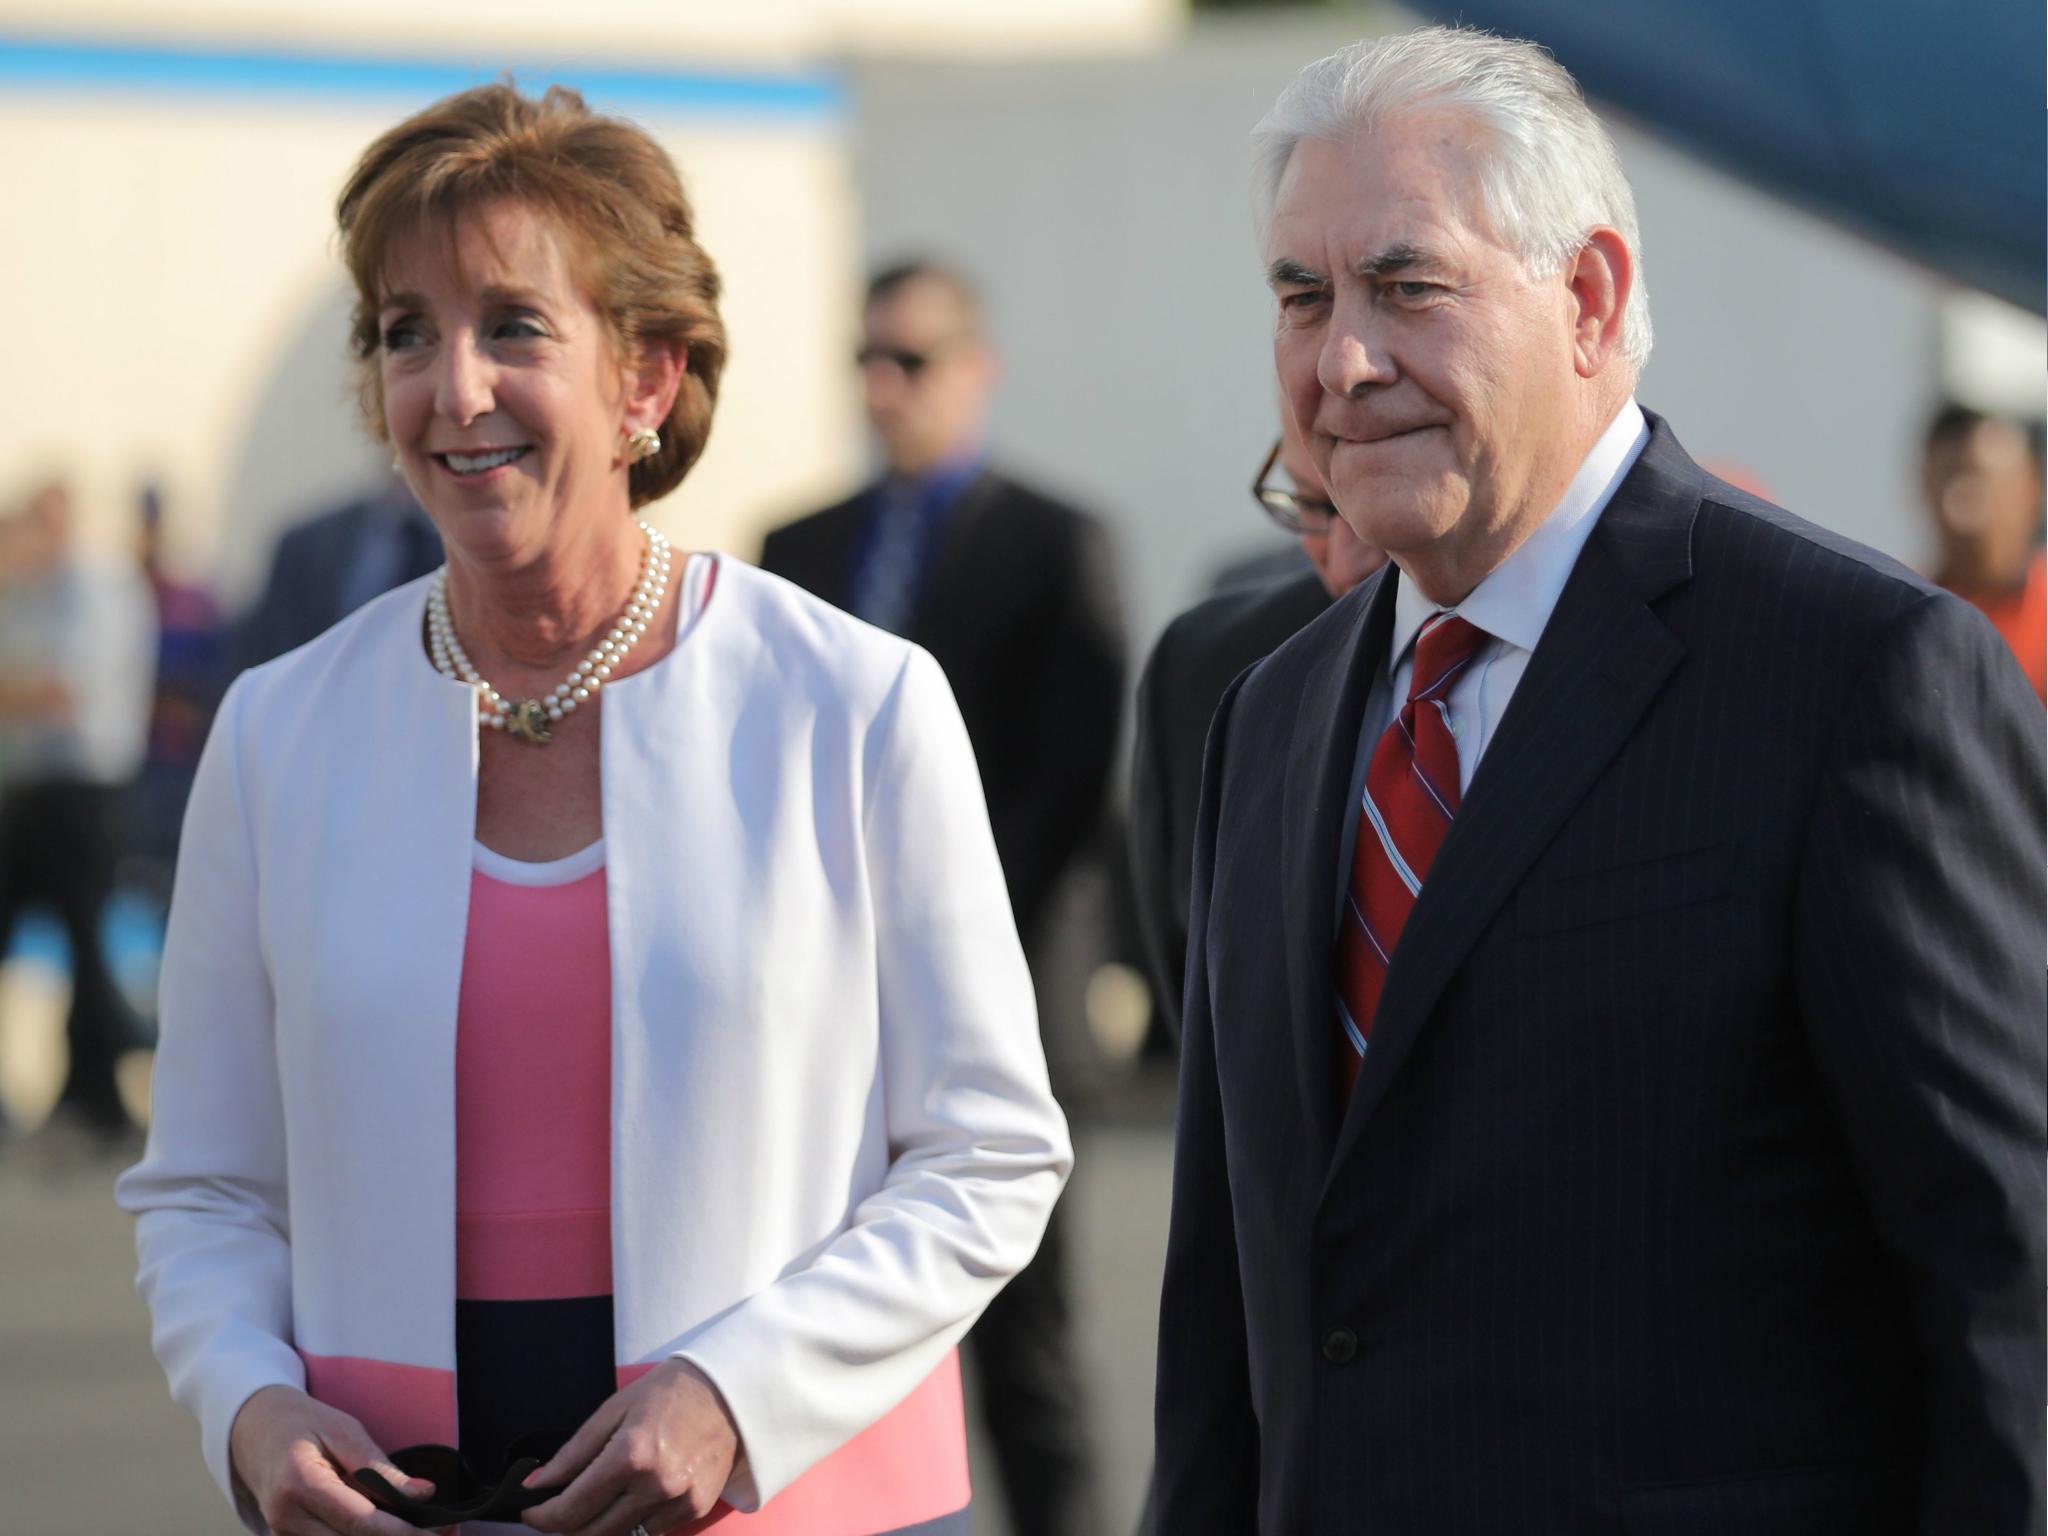 US Secretary of State Rex Tillerson is welcomed by US ambassador Roberta Jacobson as he arrives in Mexico City, Mexico on 22 February 2017.